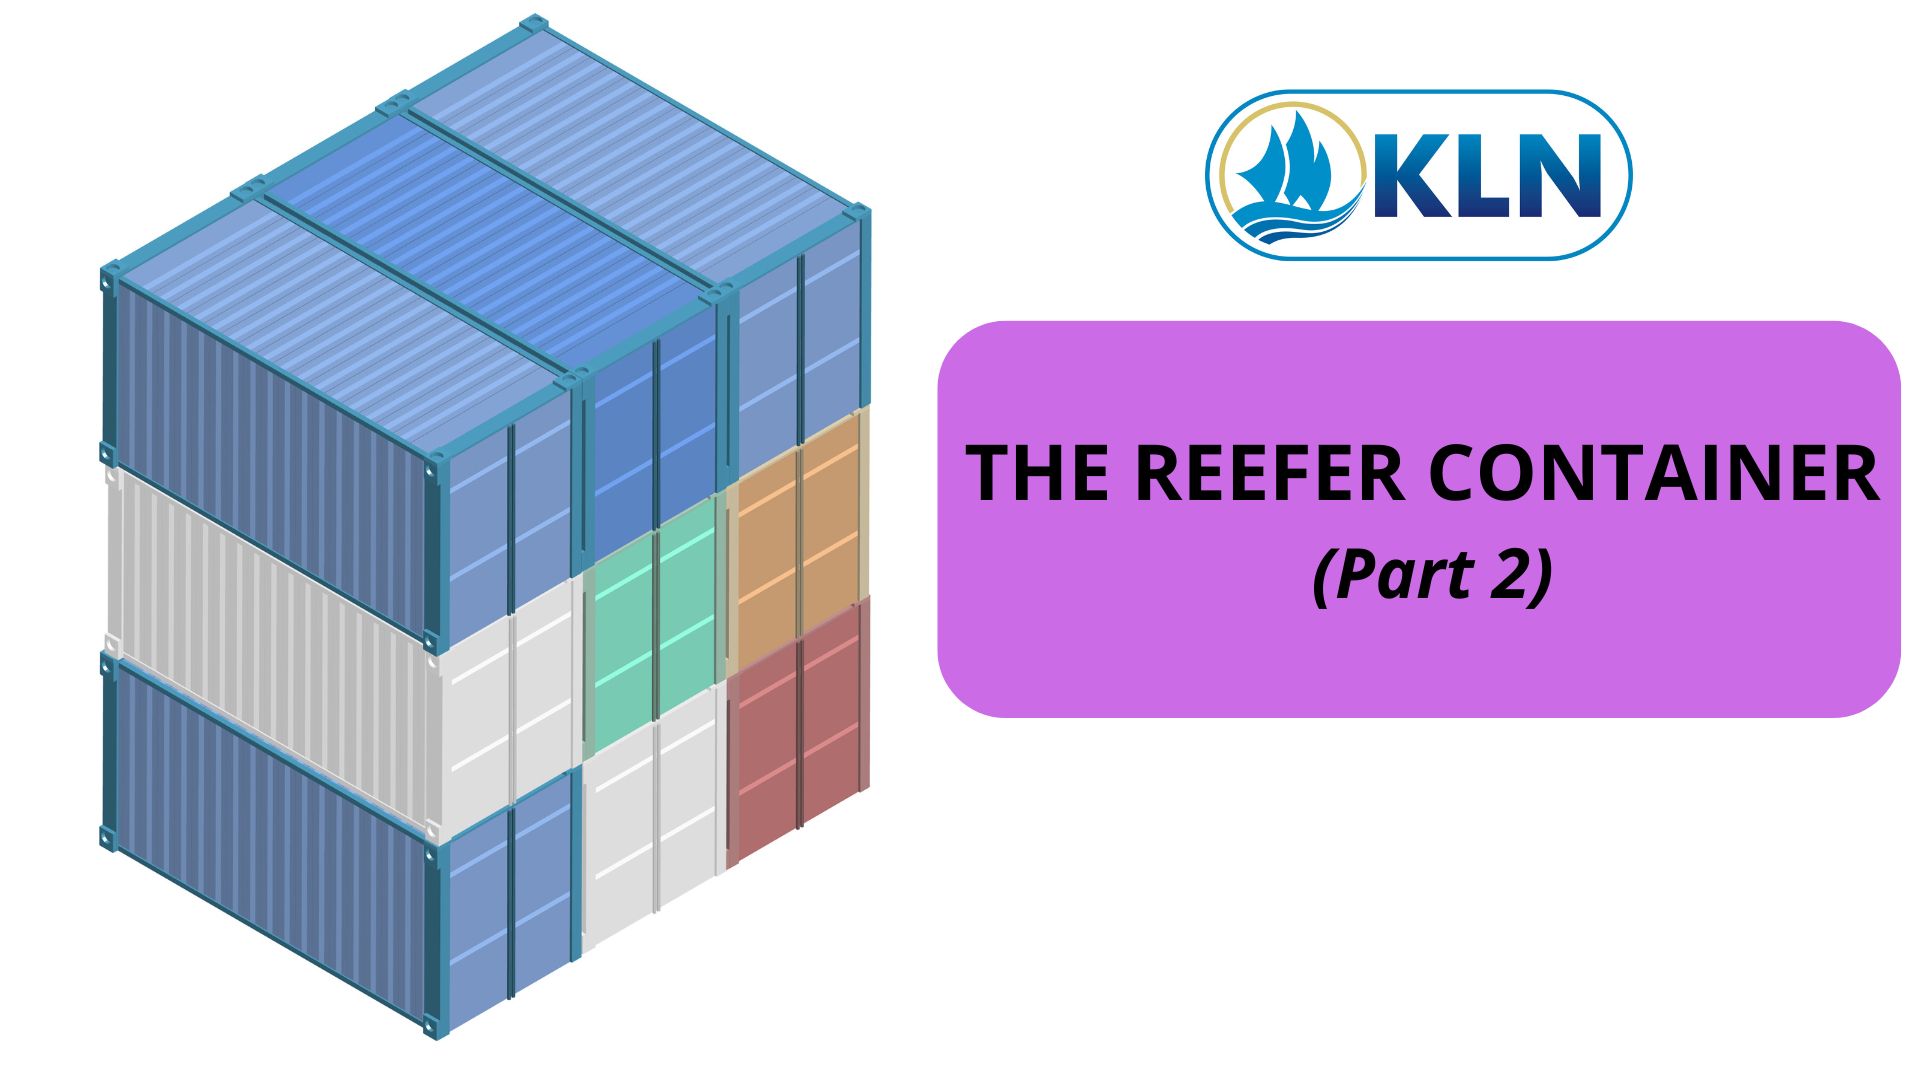 THE REEFER CONTAINER (Part 2)